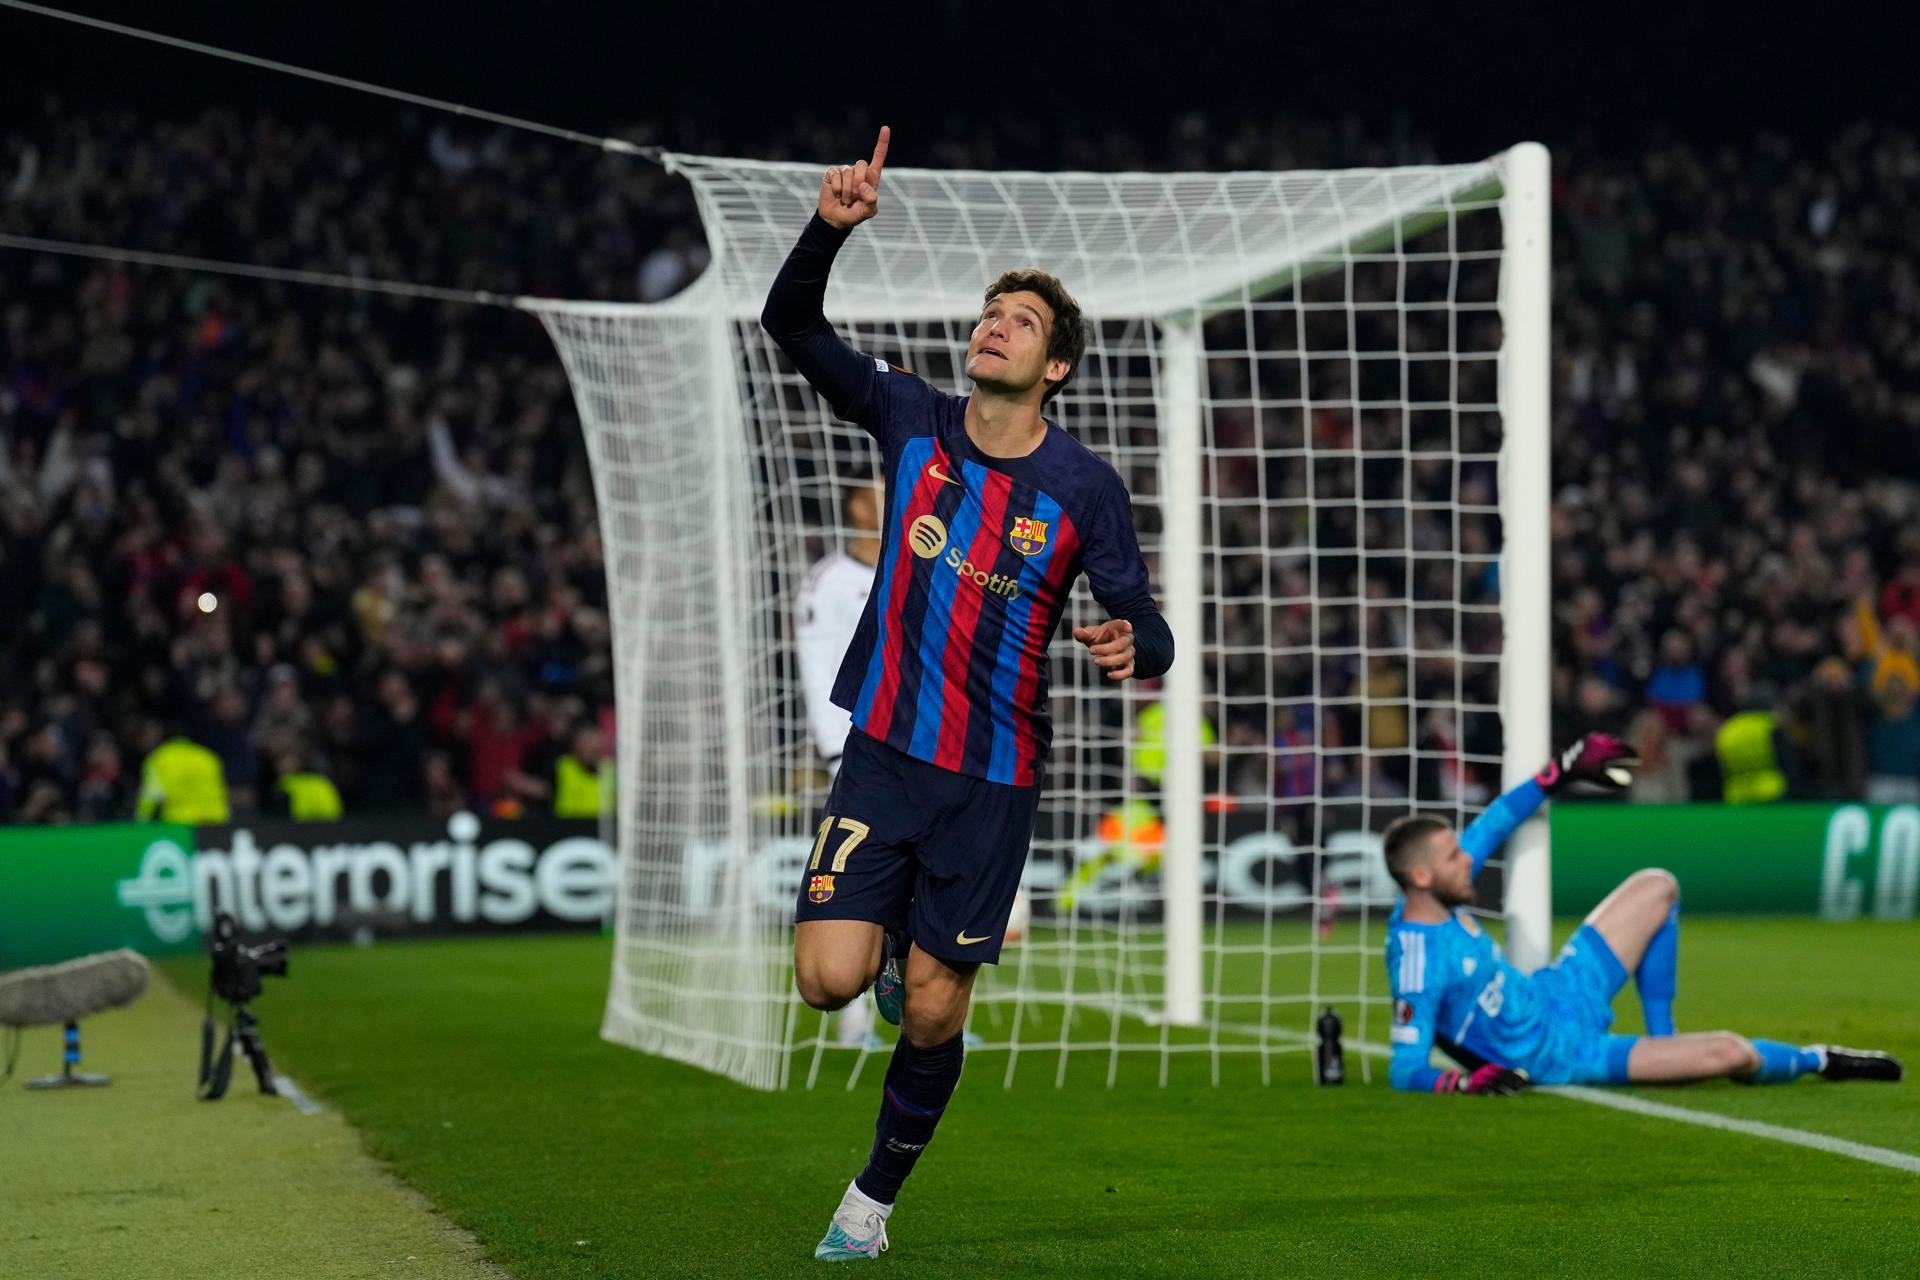 Marcos Alonso, who still has two weeks left on his contract as a Barcelona player, was critical of the 